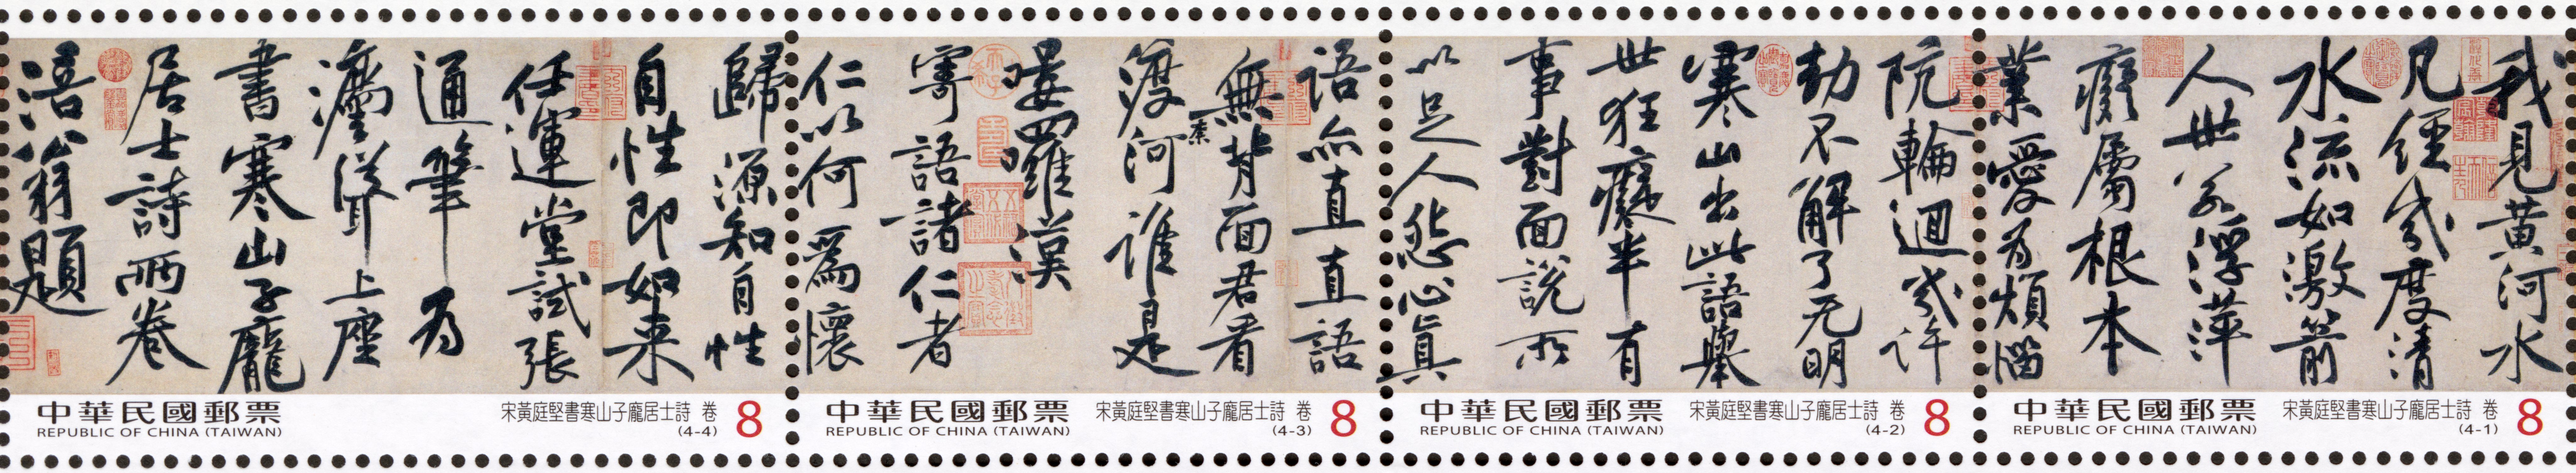 Calligraphy Postage Stamps - Huang Ting-chien, Sung Dynasty